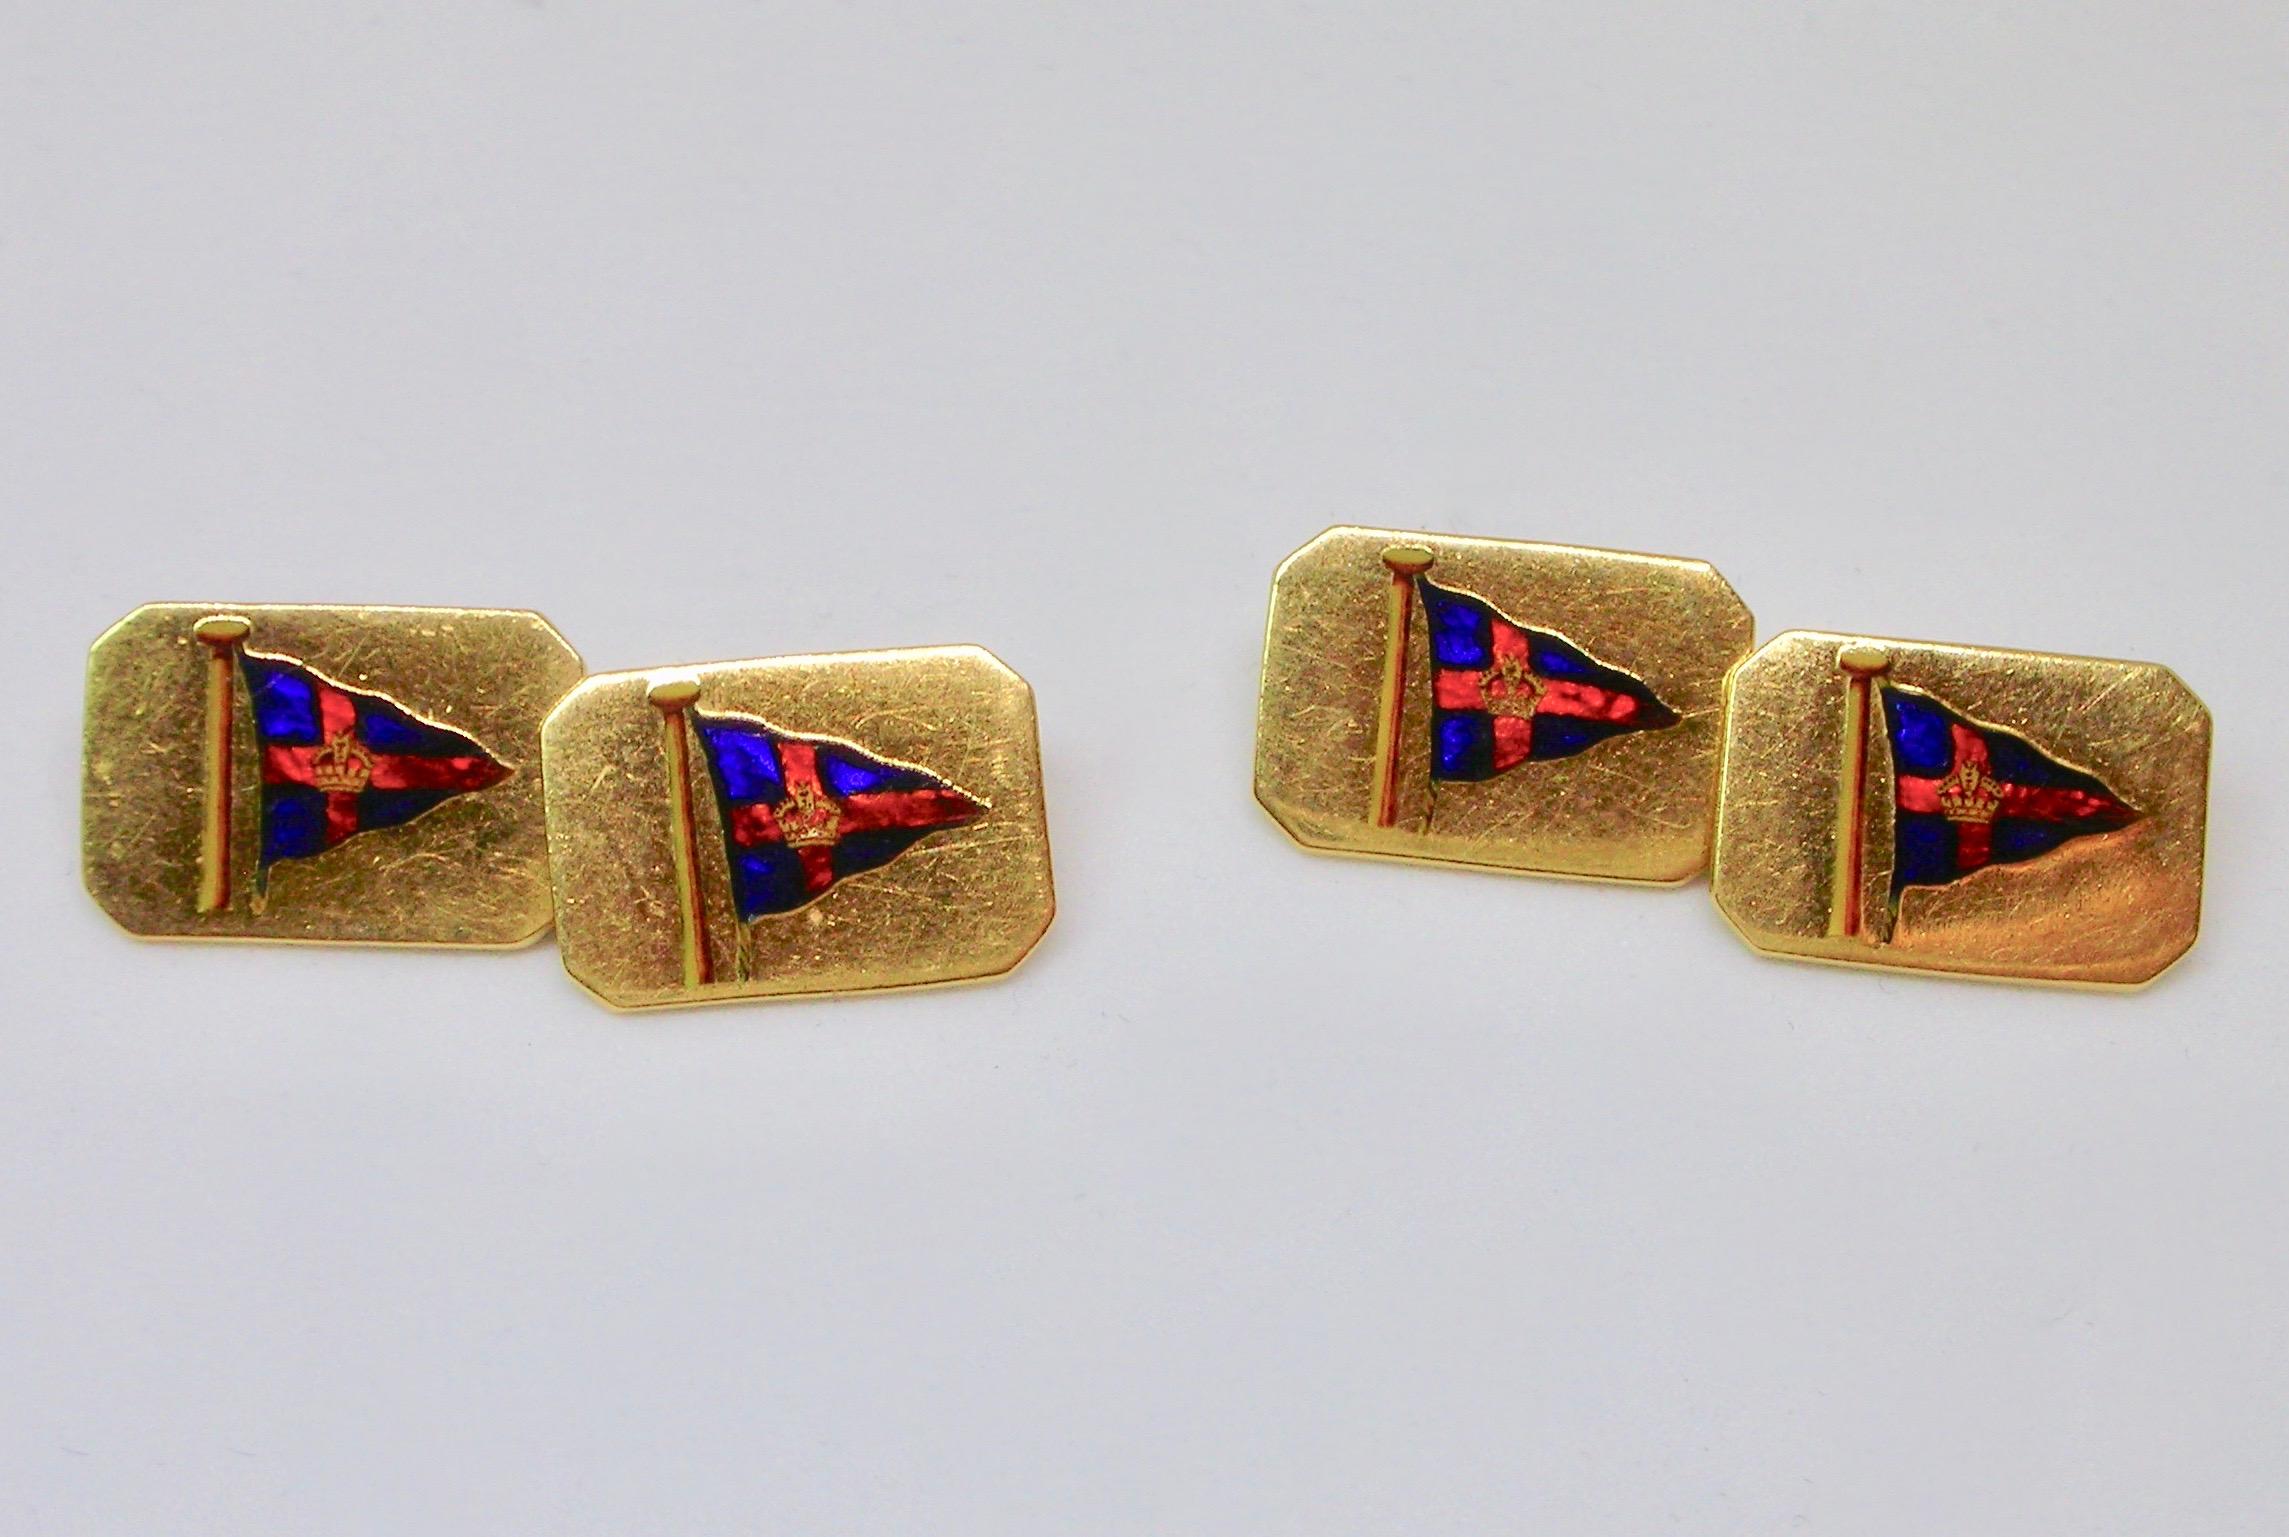 Nautical cufflinks in 18ct gold with polychrome enamels, signed Benzie of Cowes (Isle of Wight), probably from the 1940s circa, with the Royal Southern Yacht Club flag. Benzie have been operating since 1863 and are renowned for their yachting